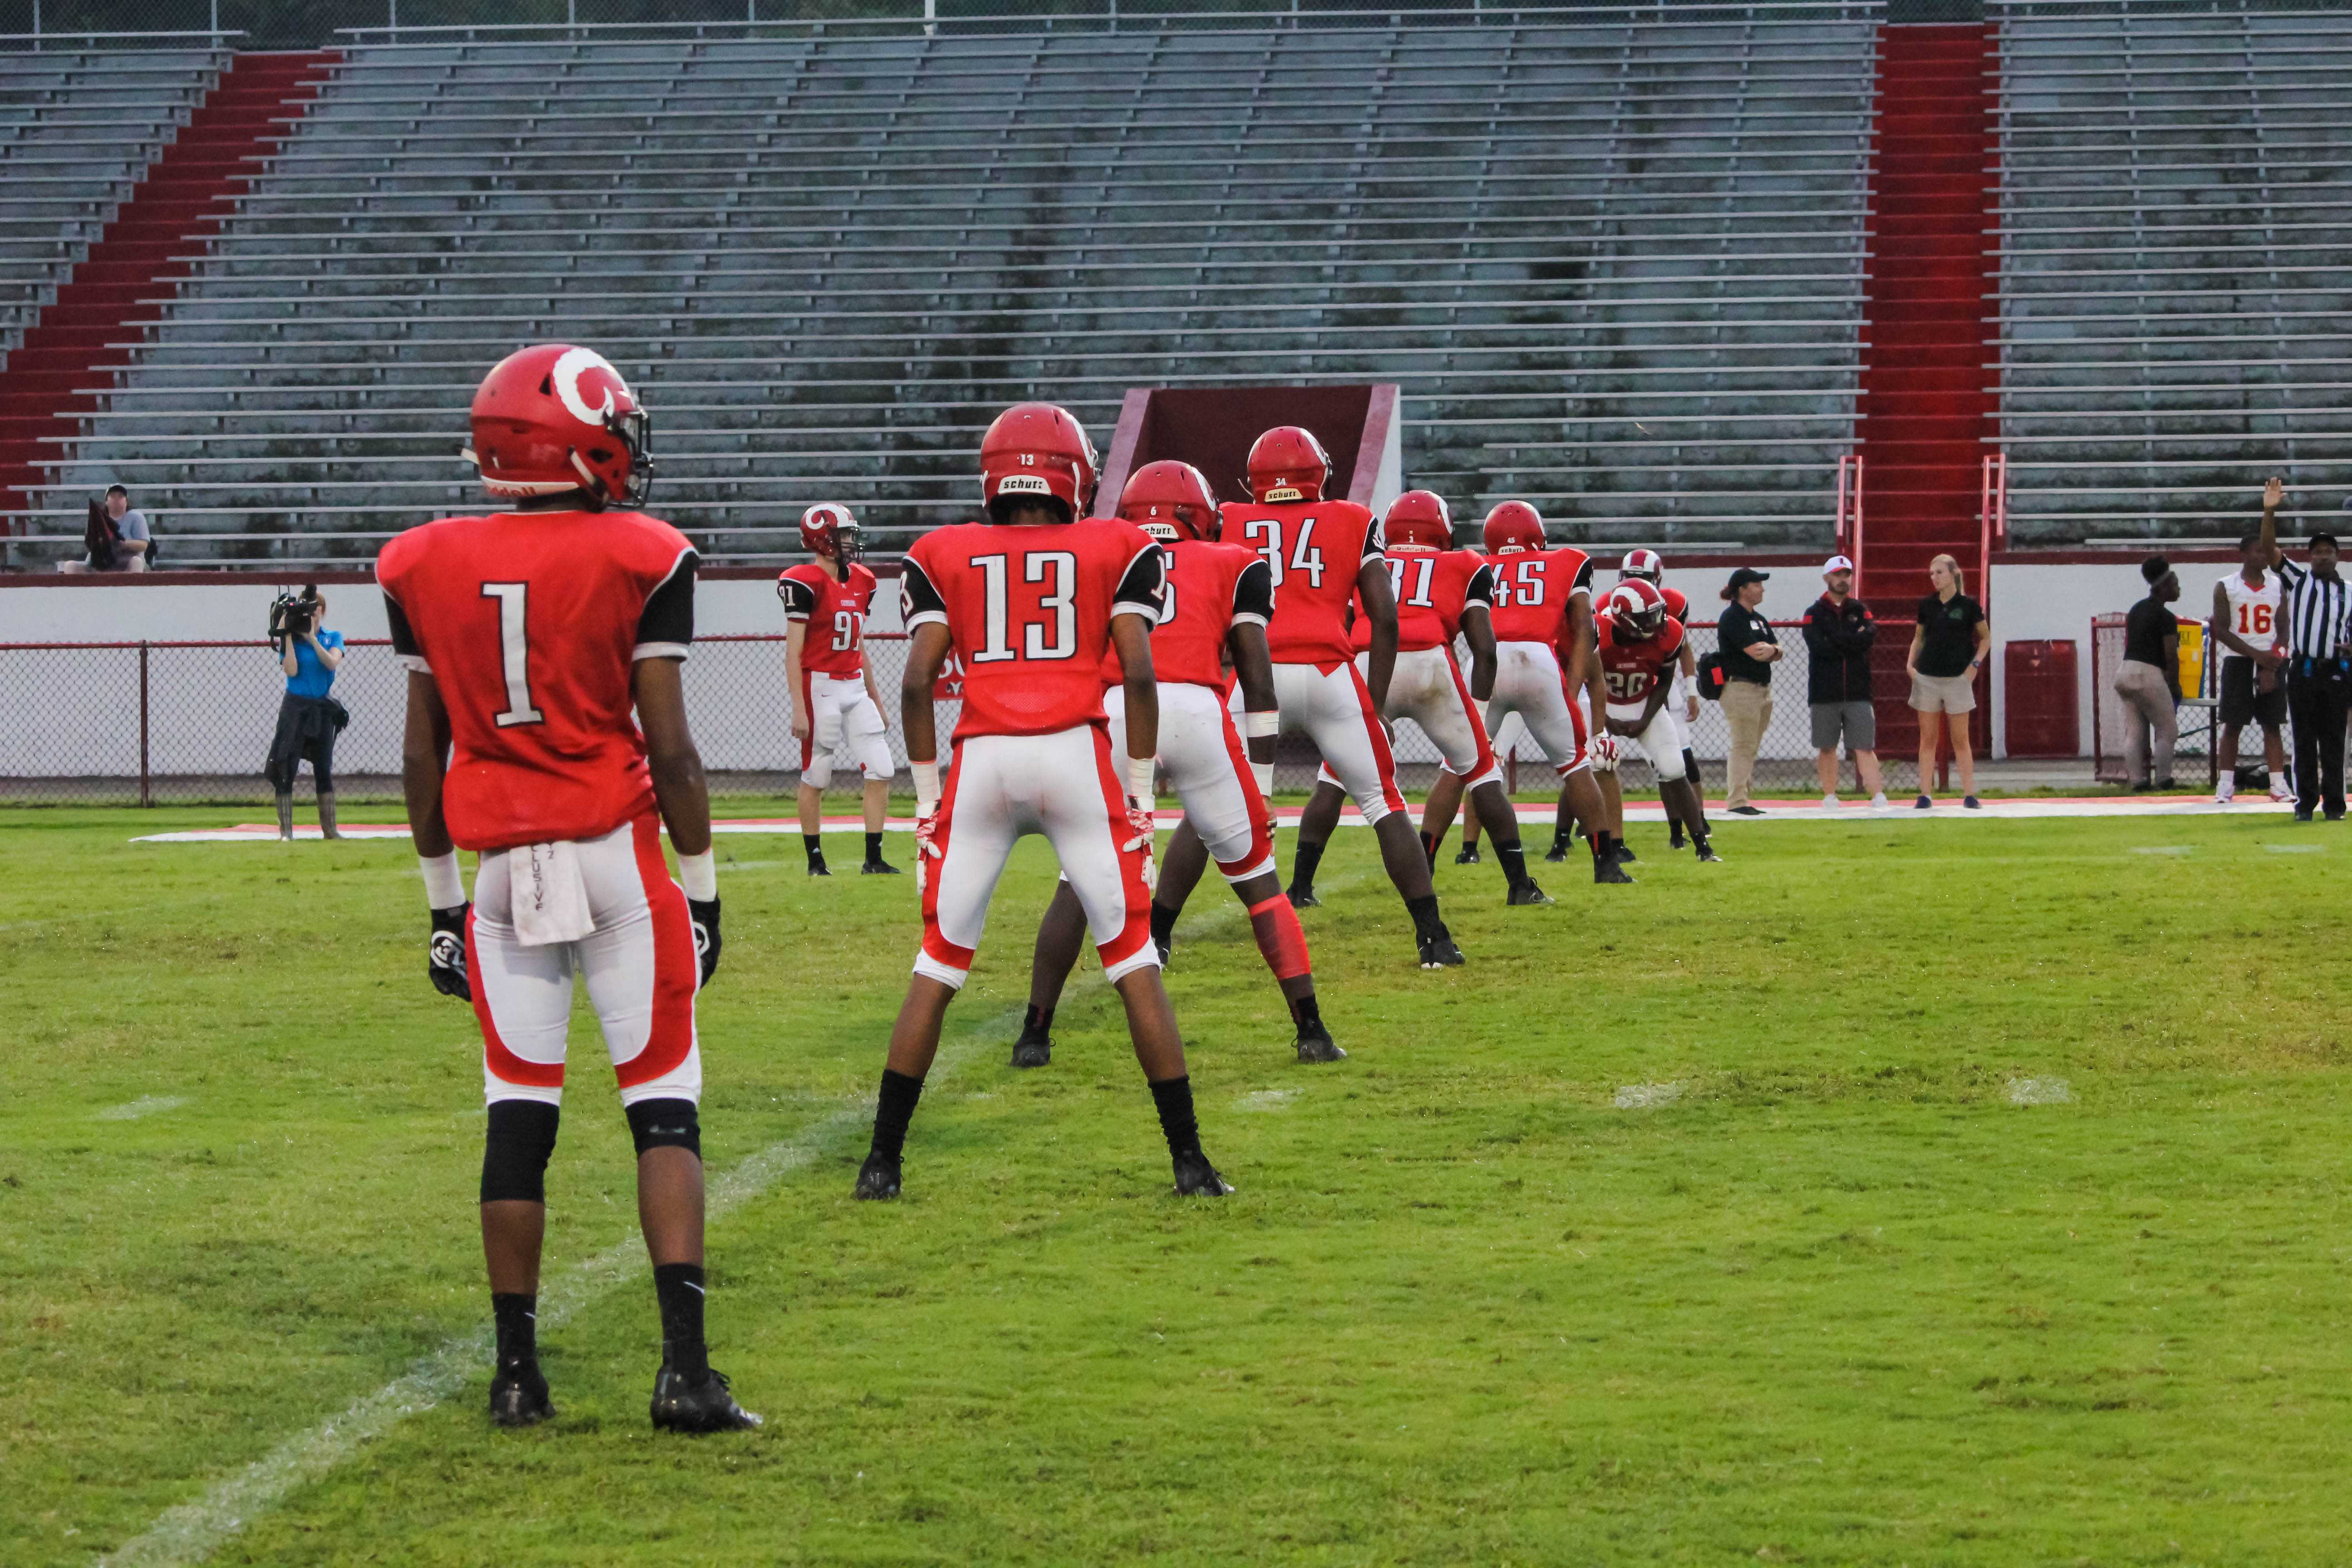 Crimsons line up for the opening kickoff as the game begins. Photo by EP Presnell.